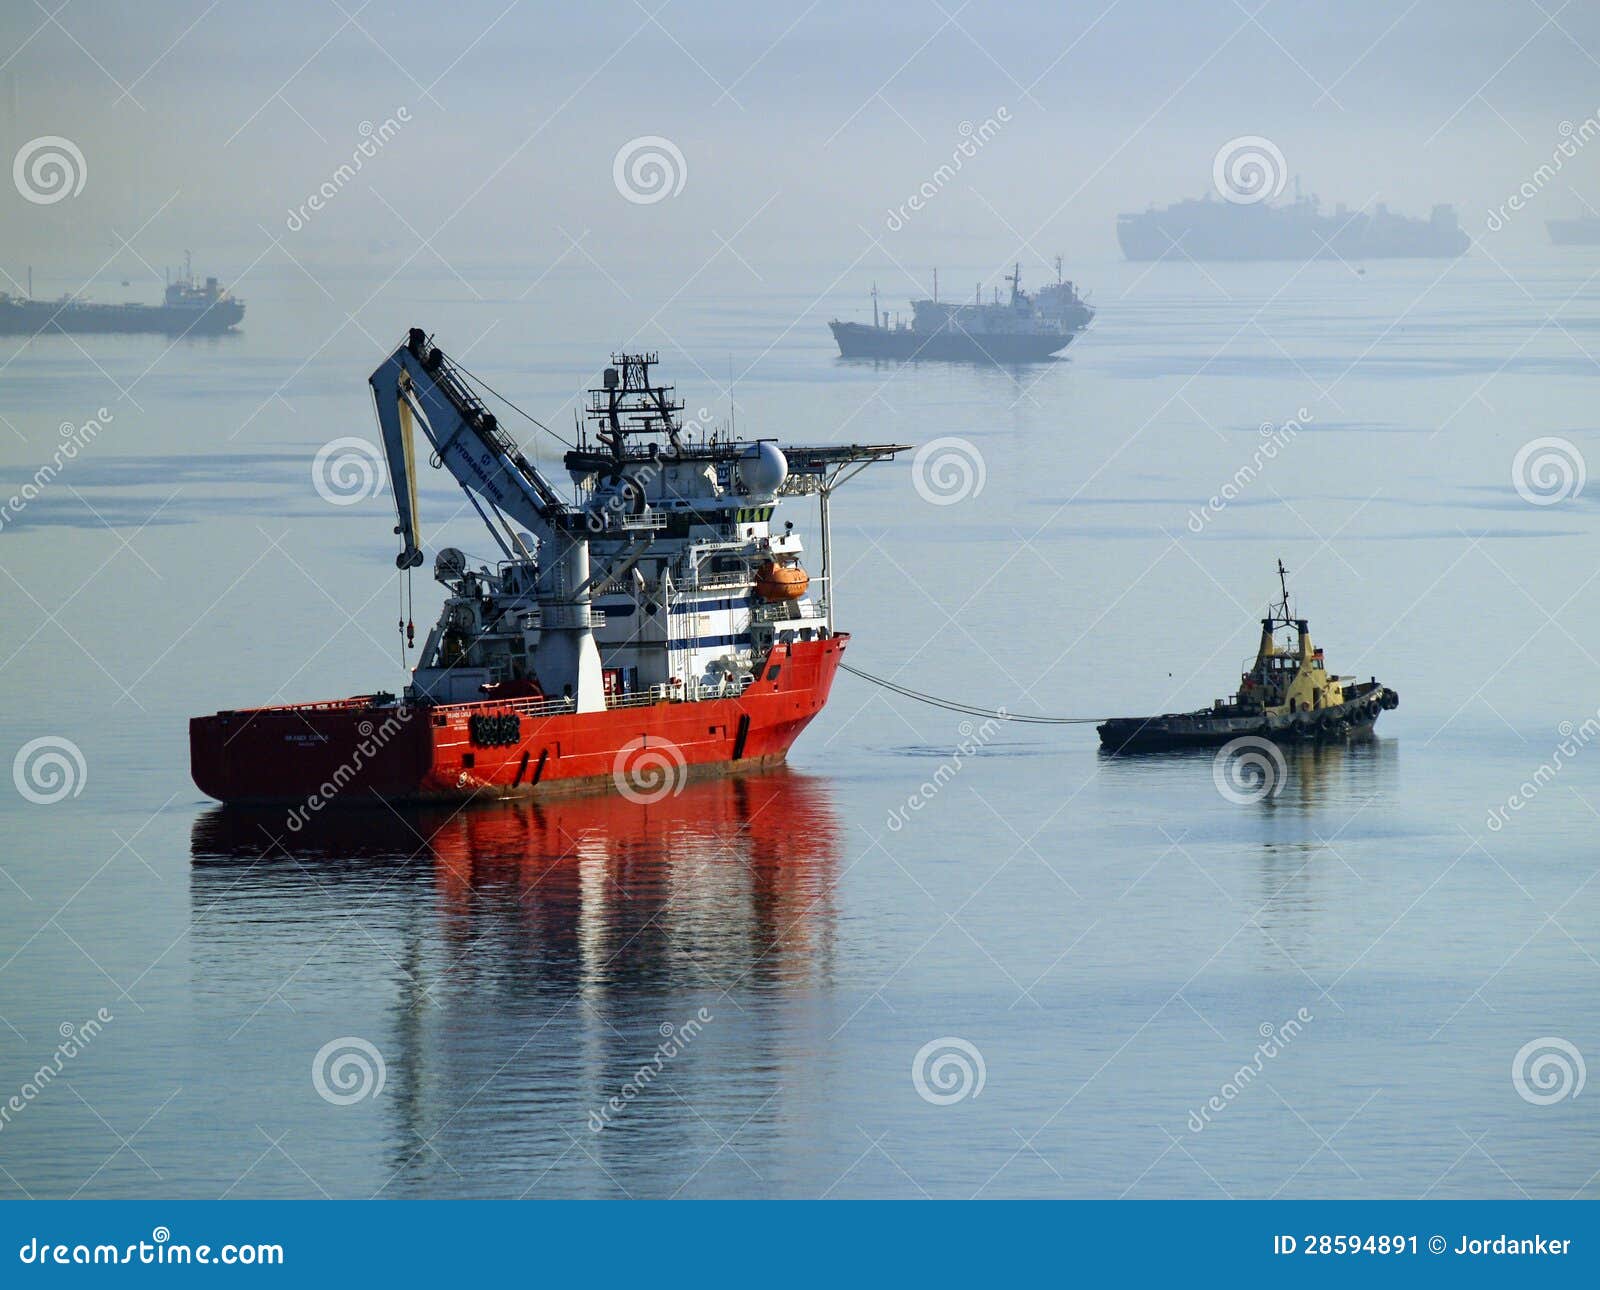 Tug Boat Towing Supply Vessel. Stock Image - Image of blue 